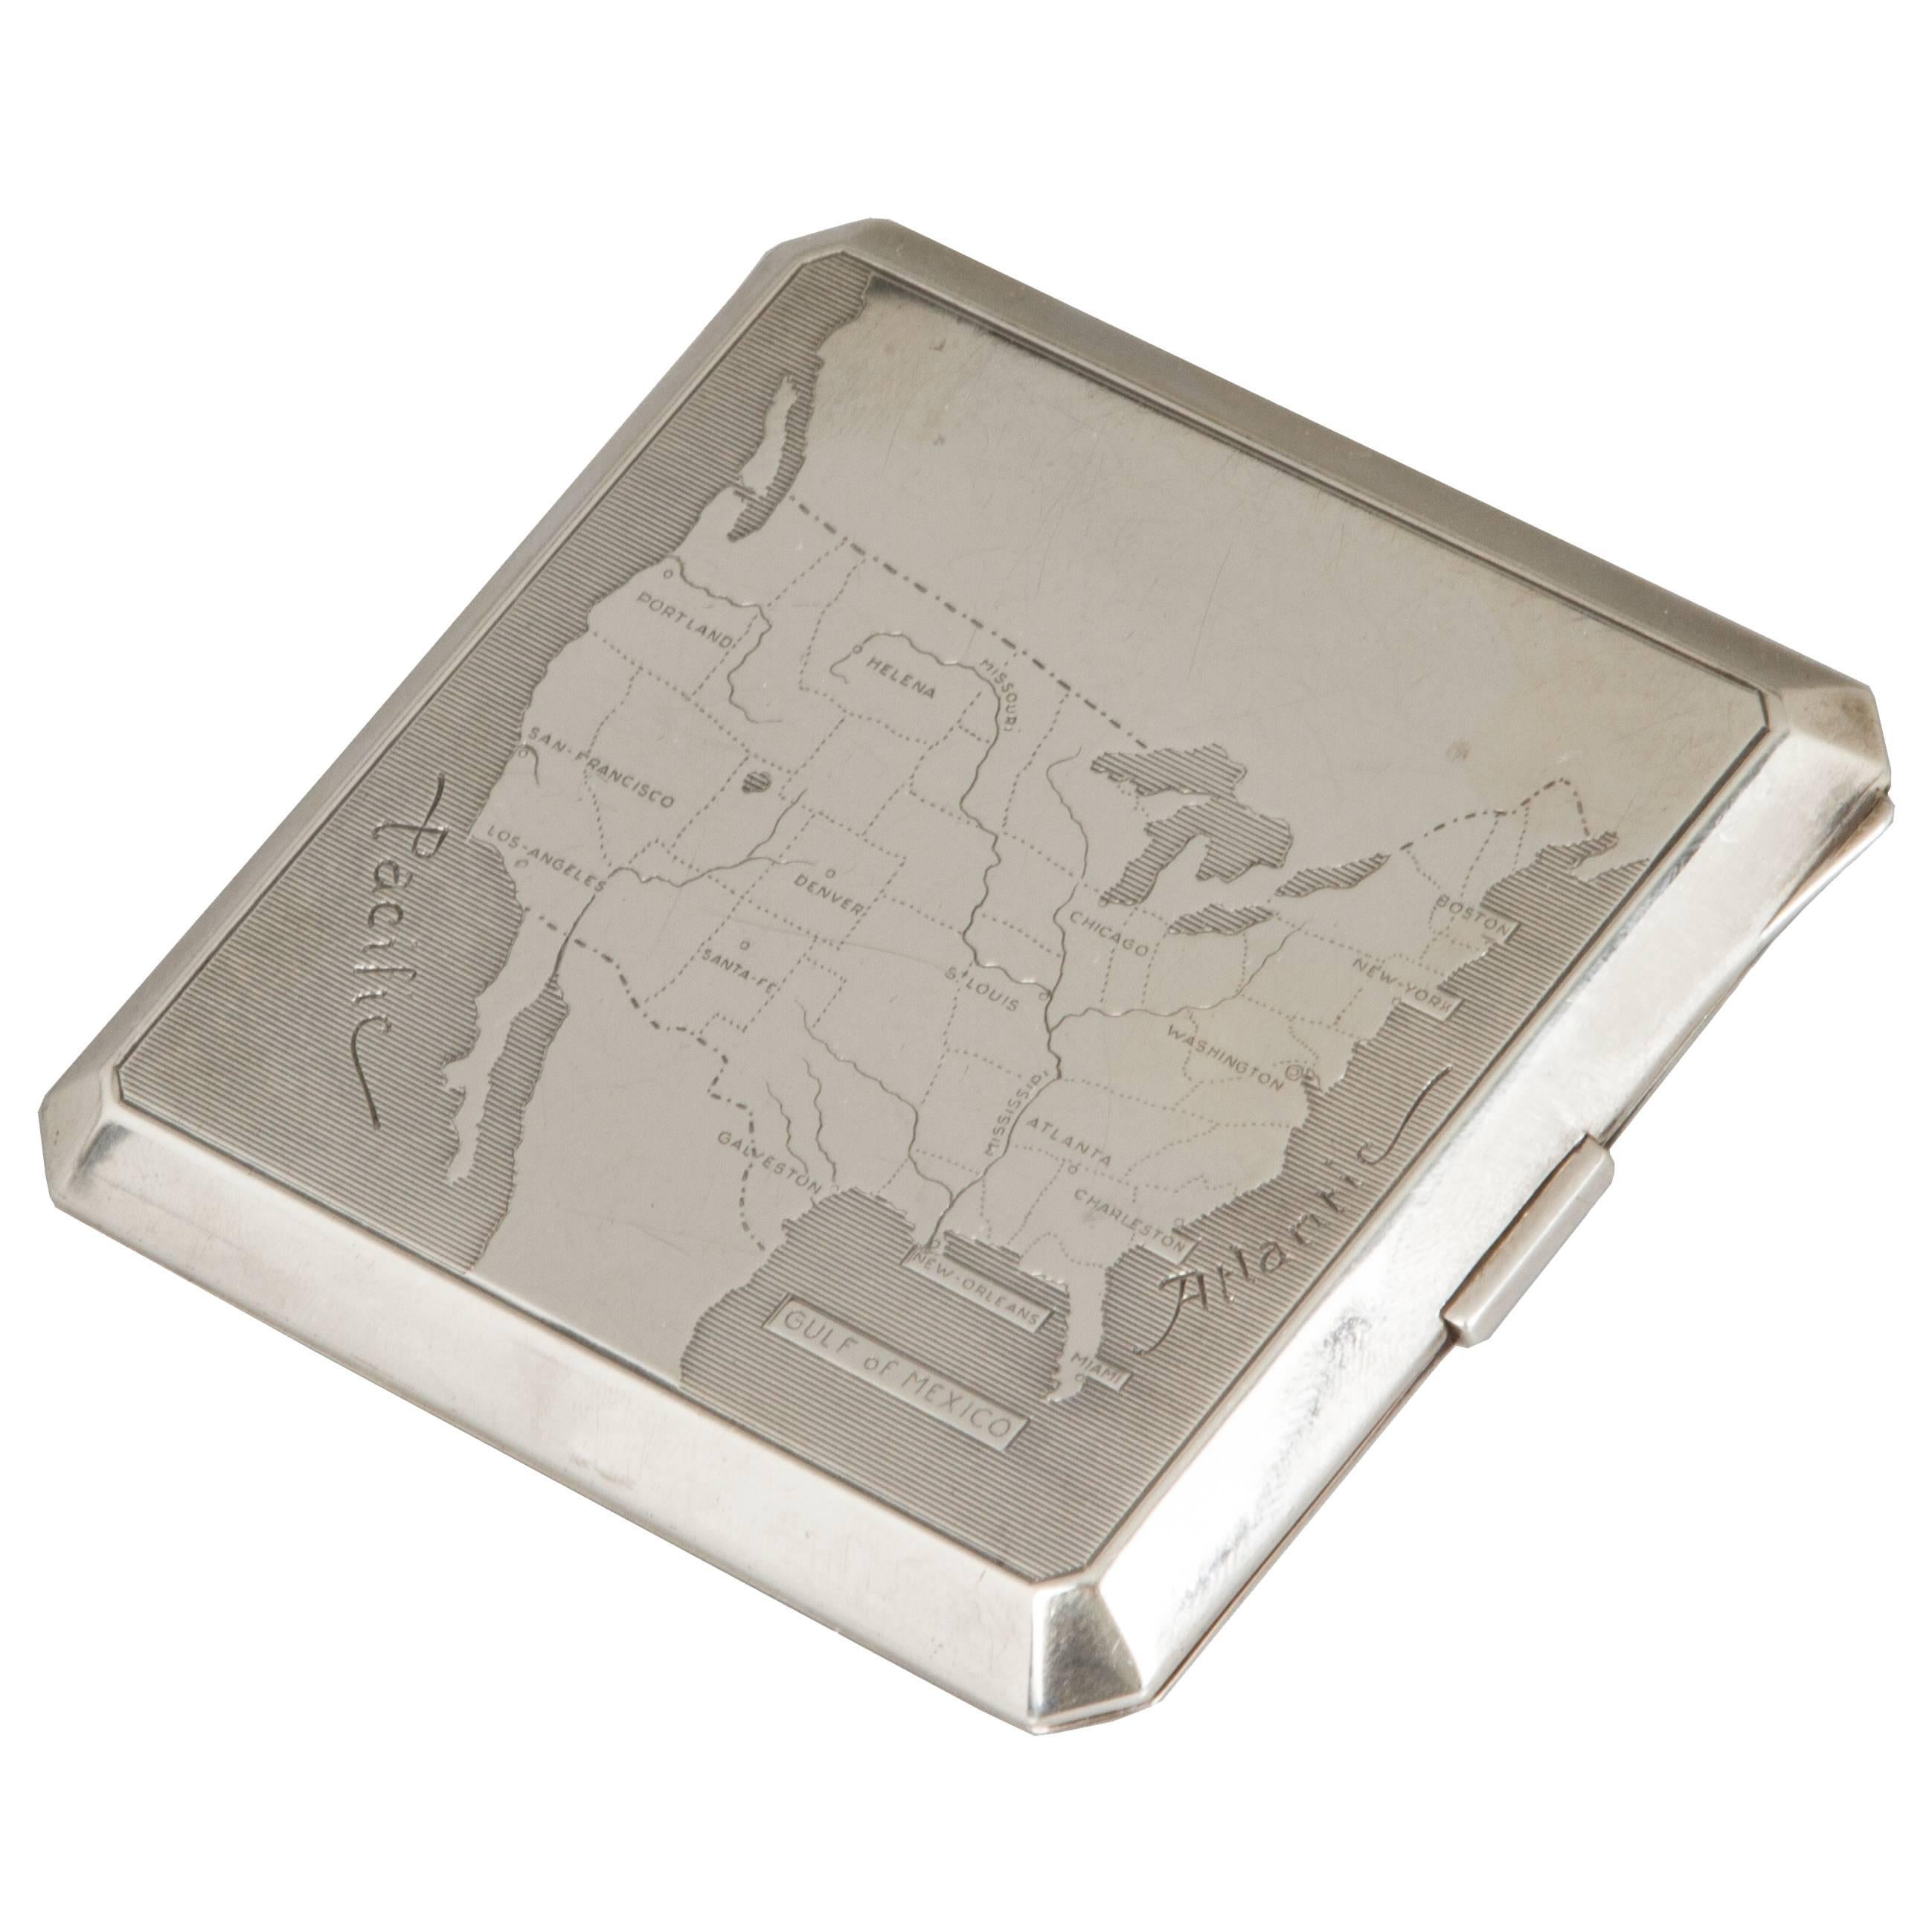 Dunhill "Map of United States" Sterling Silver Cigarette Case